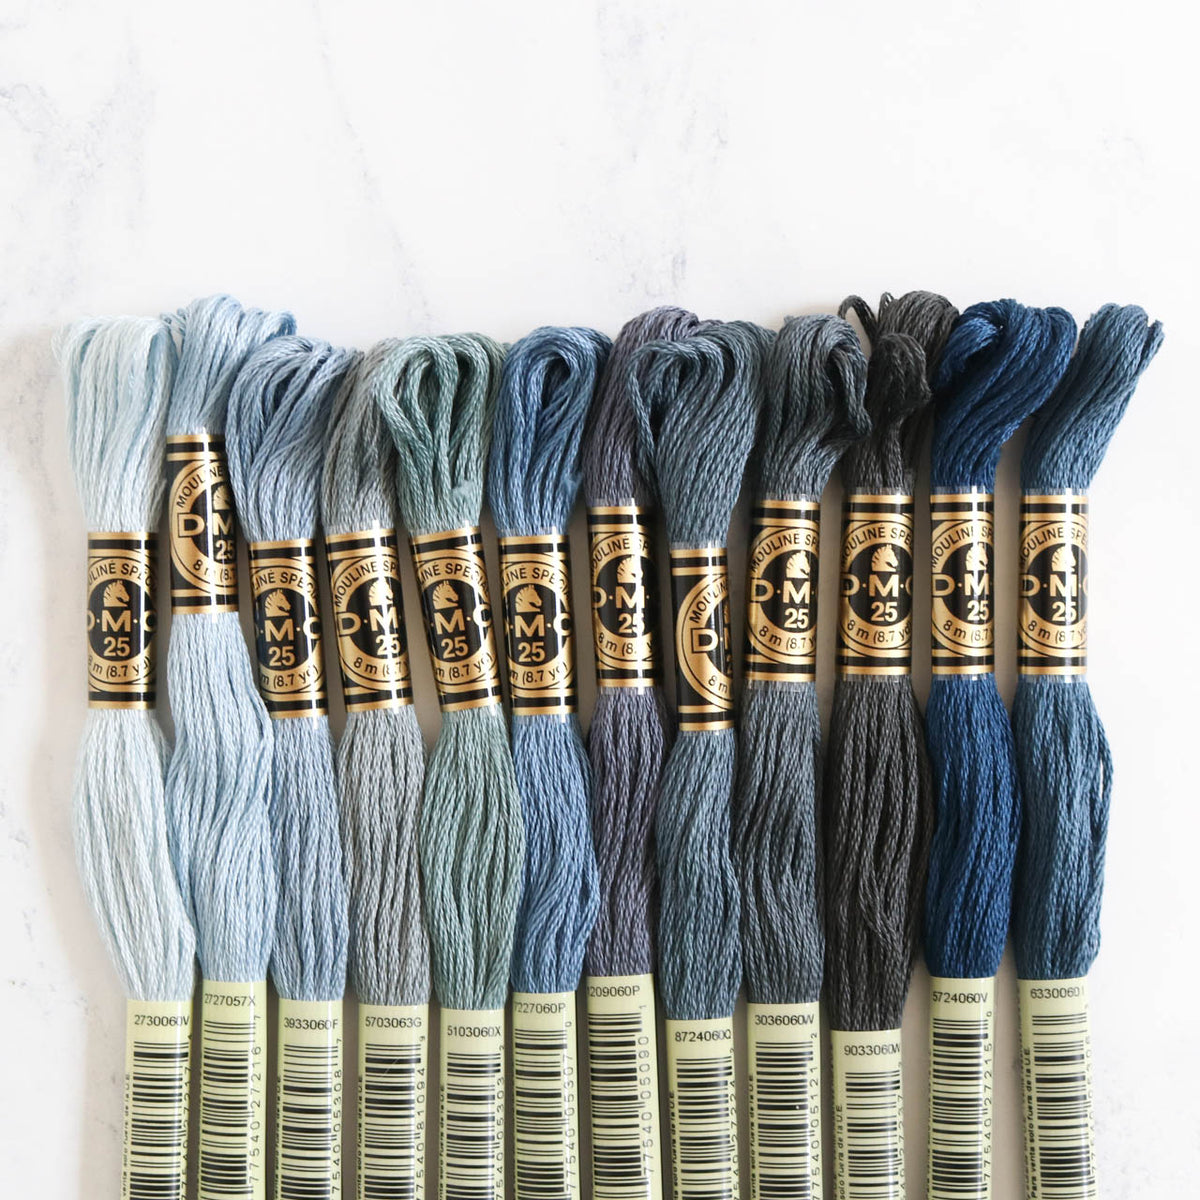 Thread Collection by Stitch People - Denim